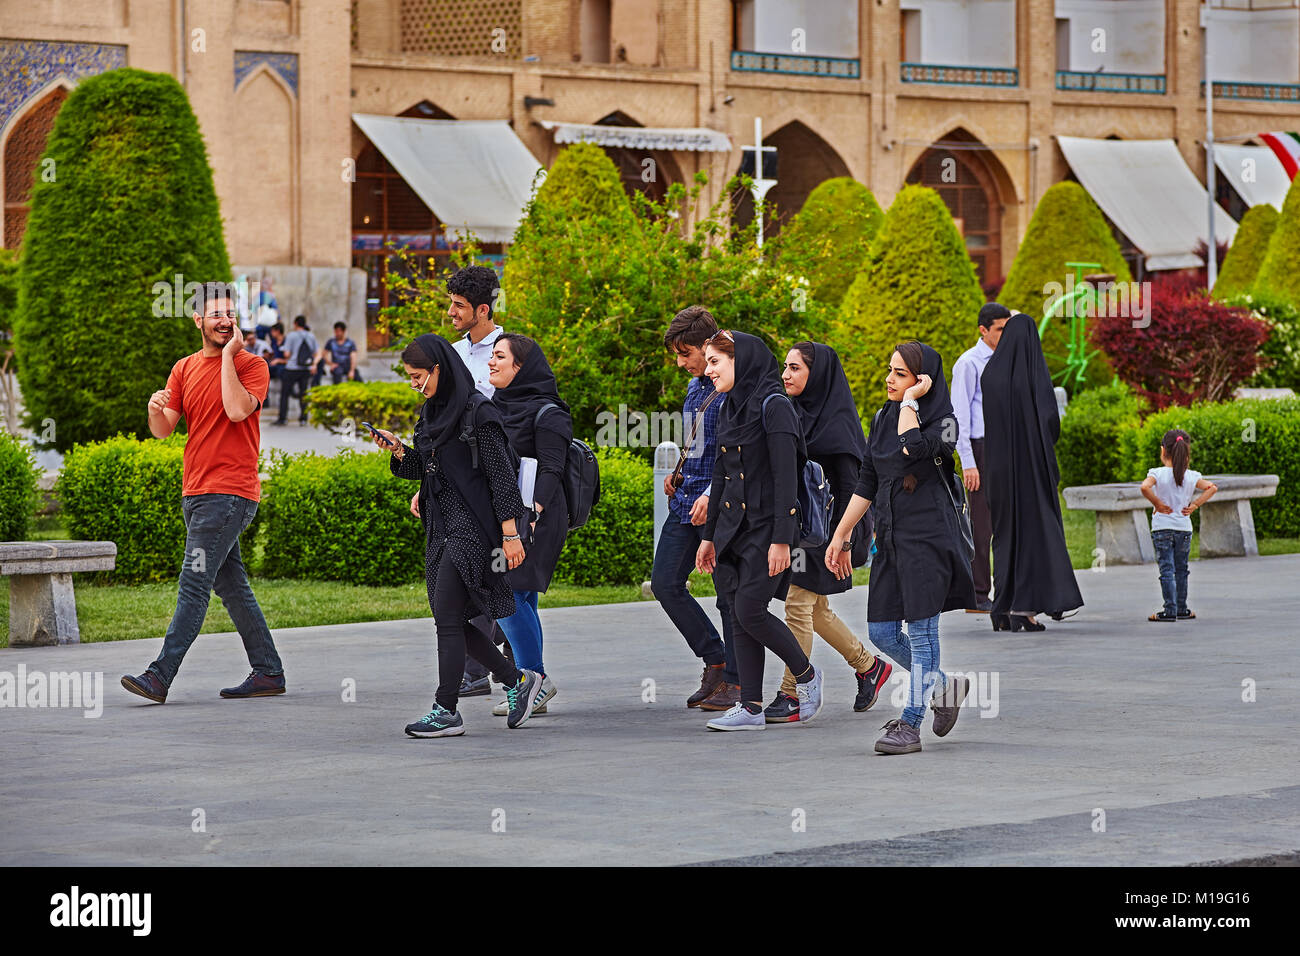 Isfahan, Iran - April 24, 2017: Several young men and women, college-age, go over the area Naghsh-e Jahan, and talking cheerfully. Stock Photo